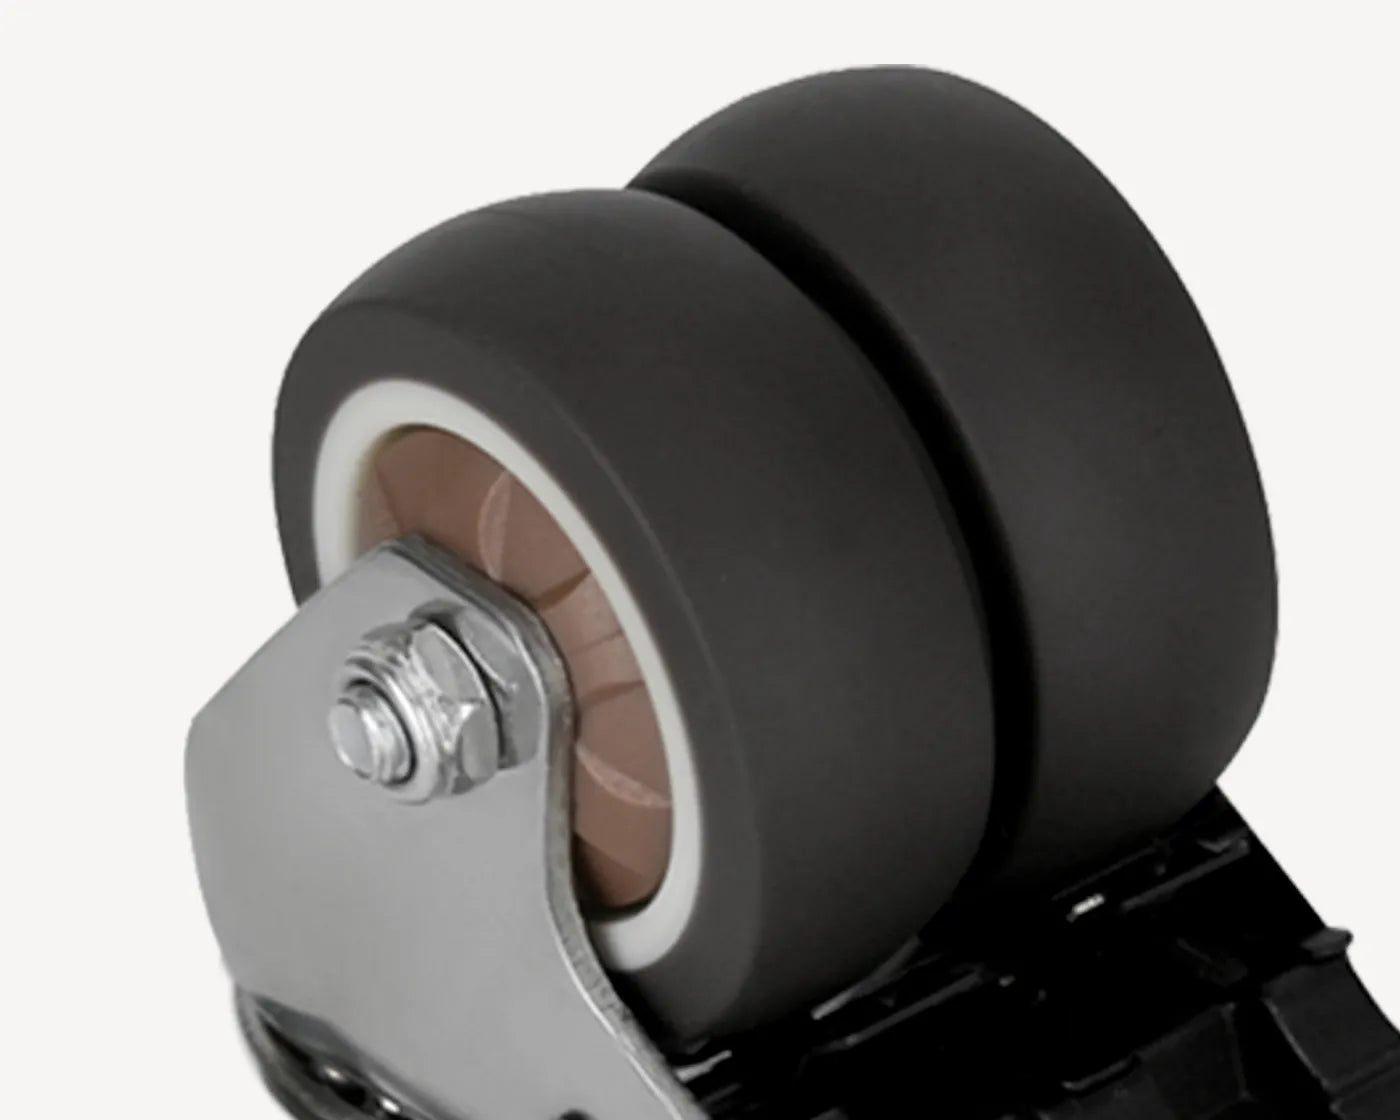 Side view of a durable caster wheel with a black rubber tire and metal hardware, designed for smooth mobility.